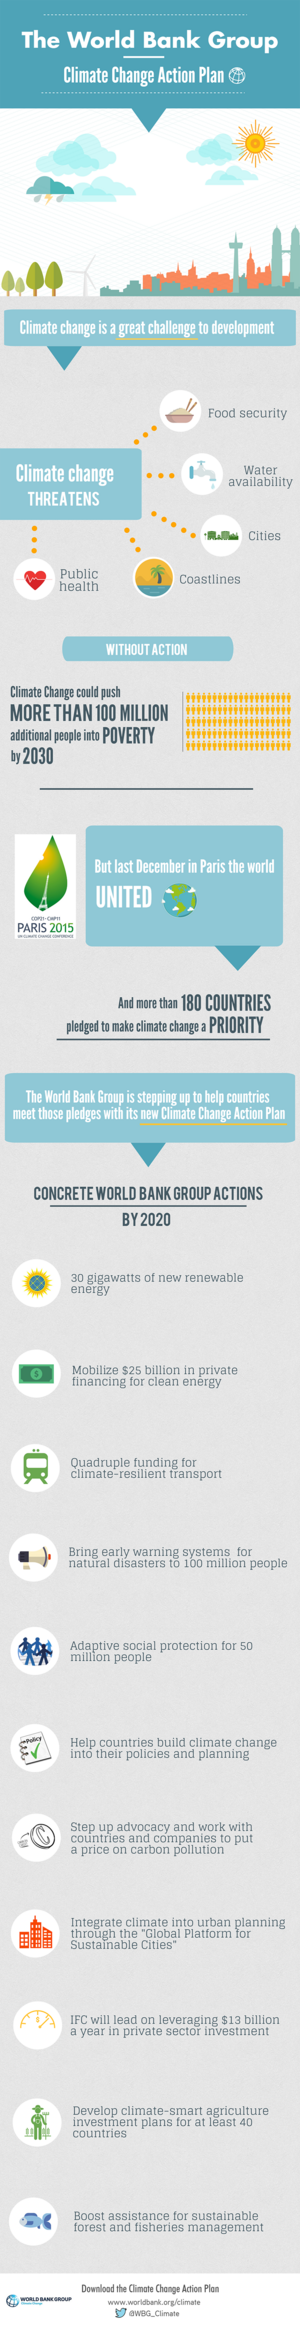 Climate-Action-Plan-World Bank-2016.png